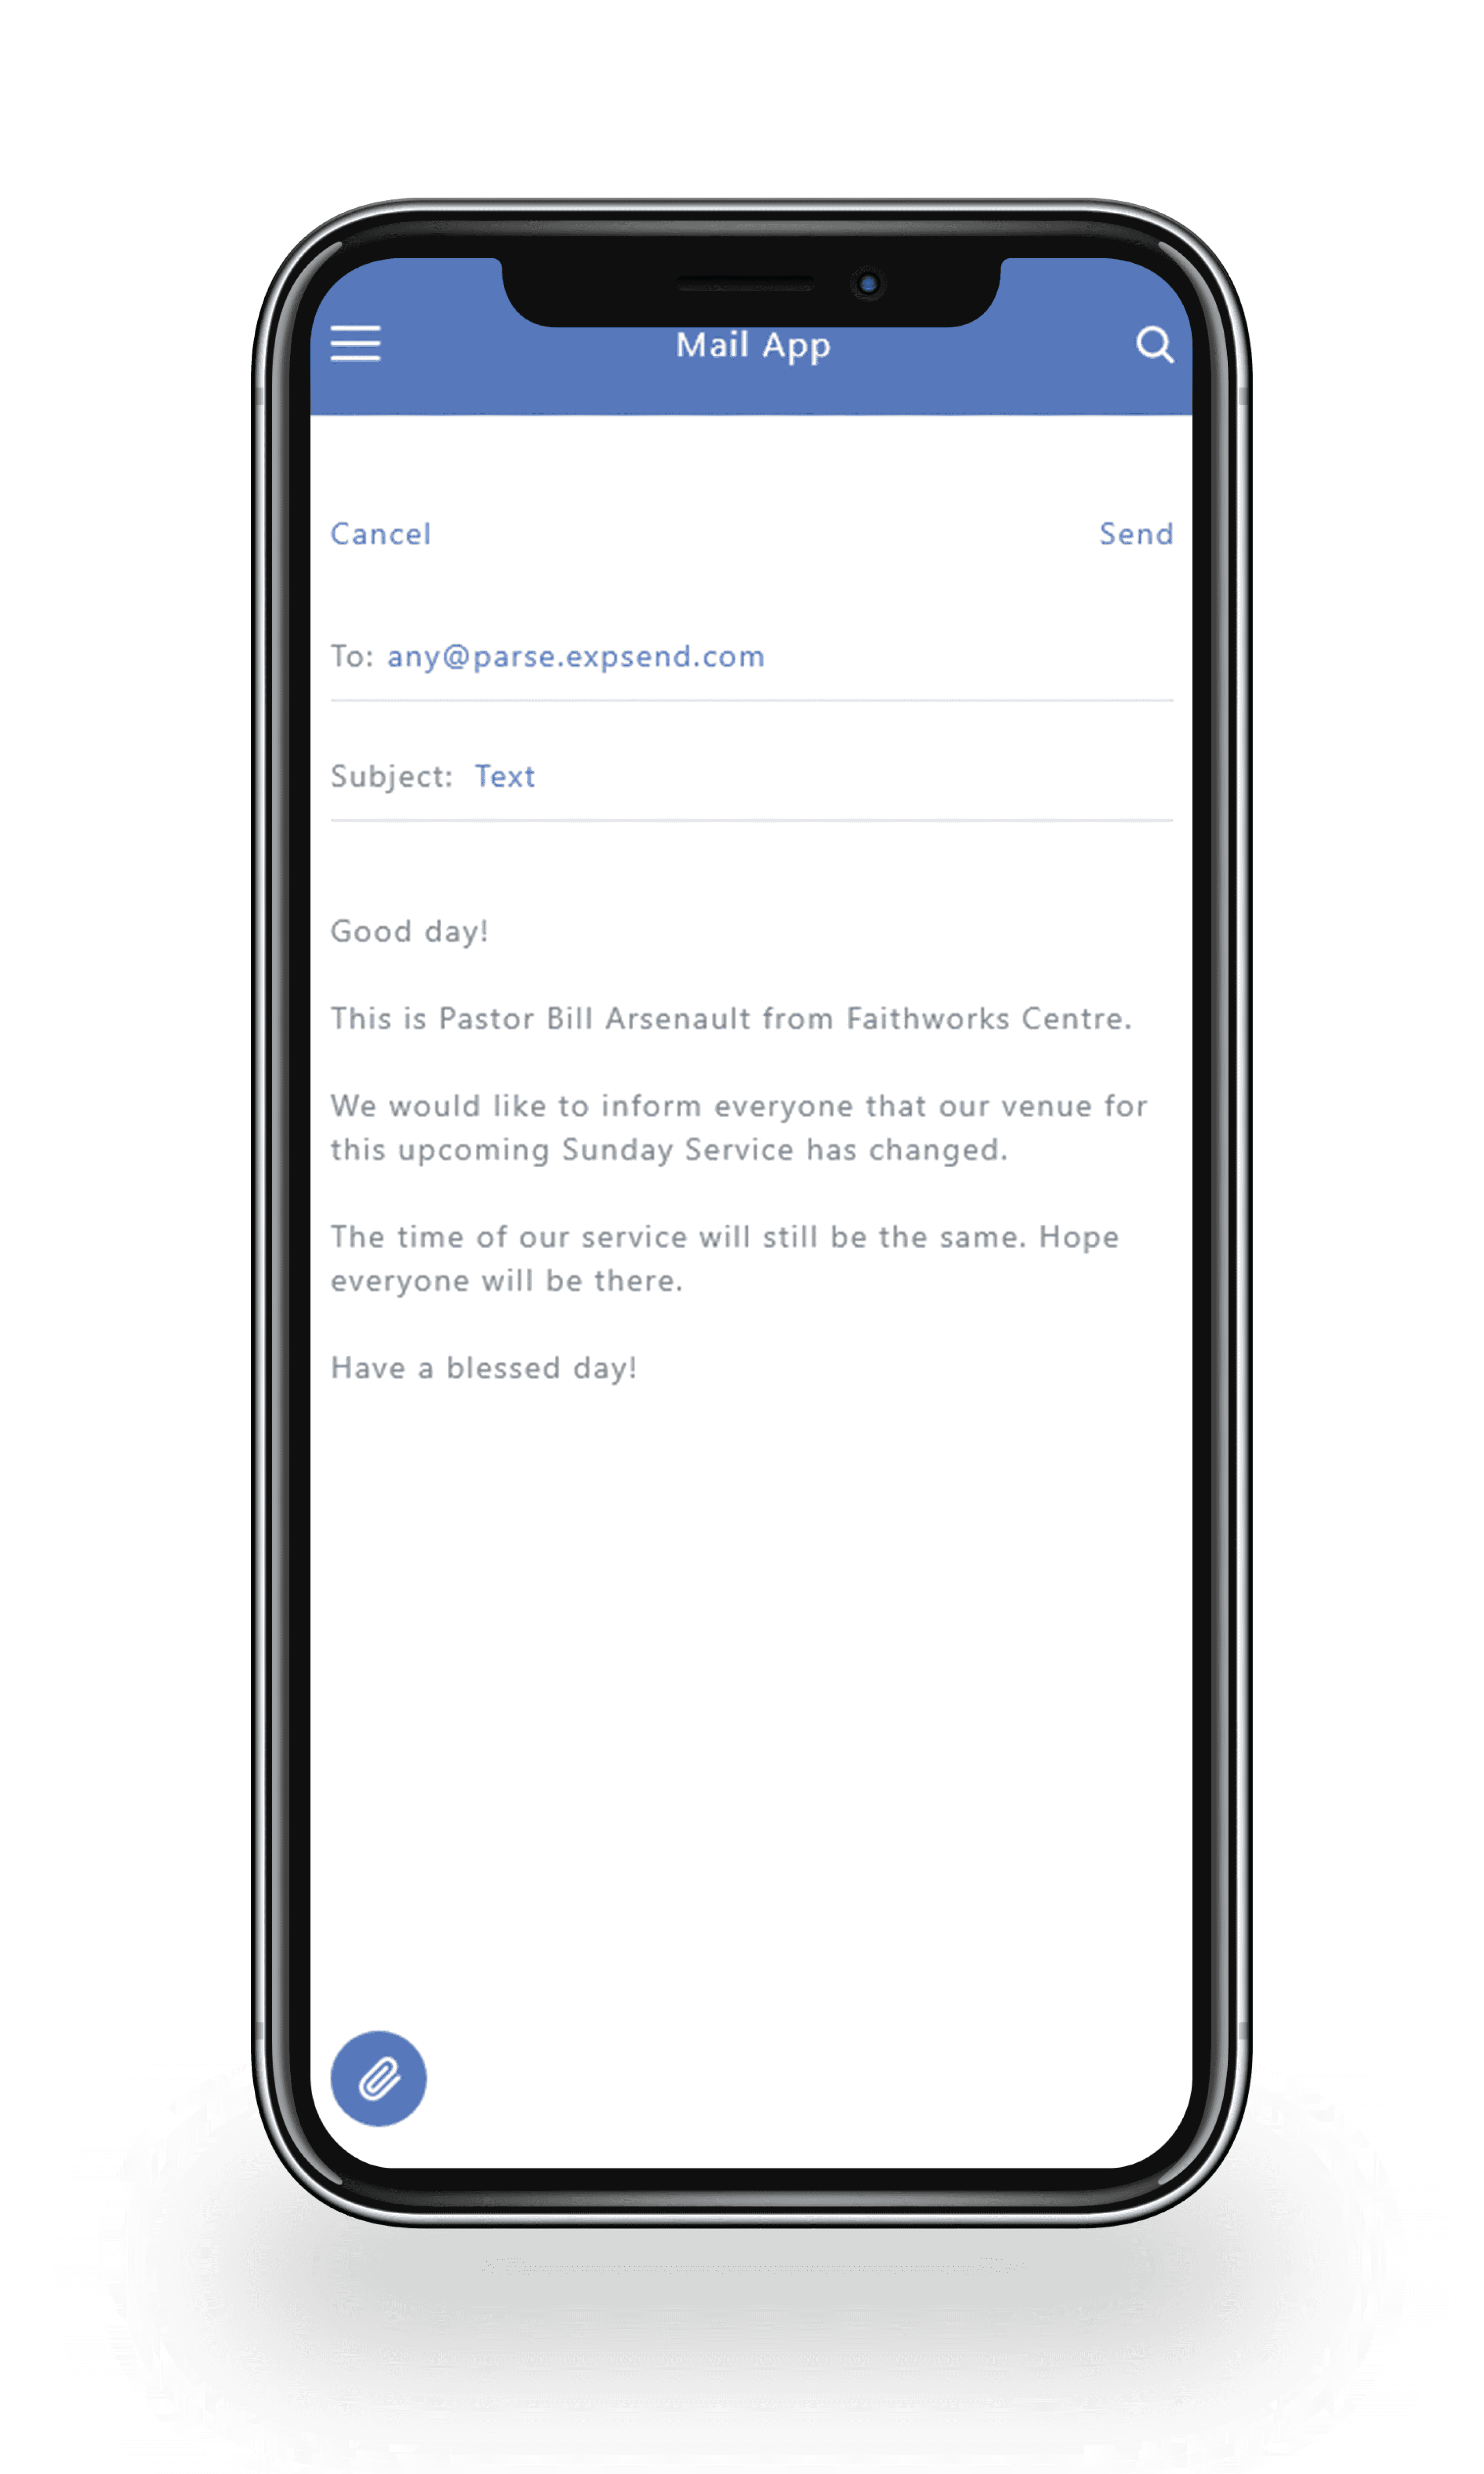 Email-to-text system